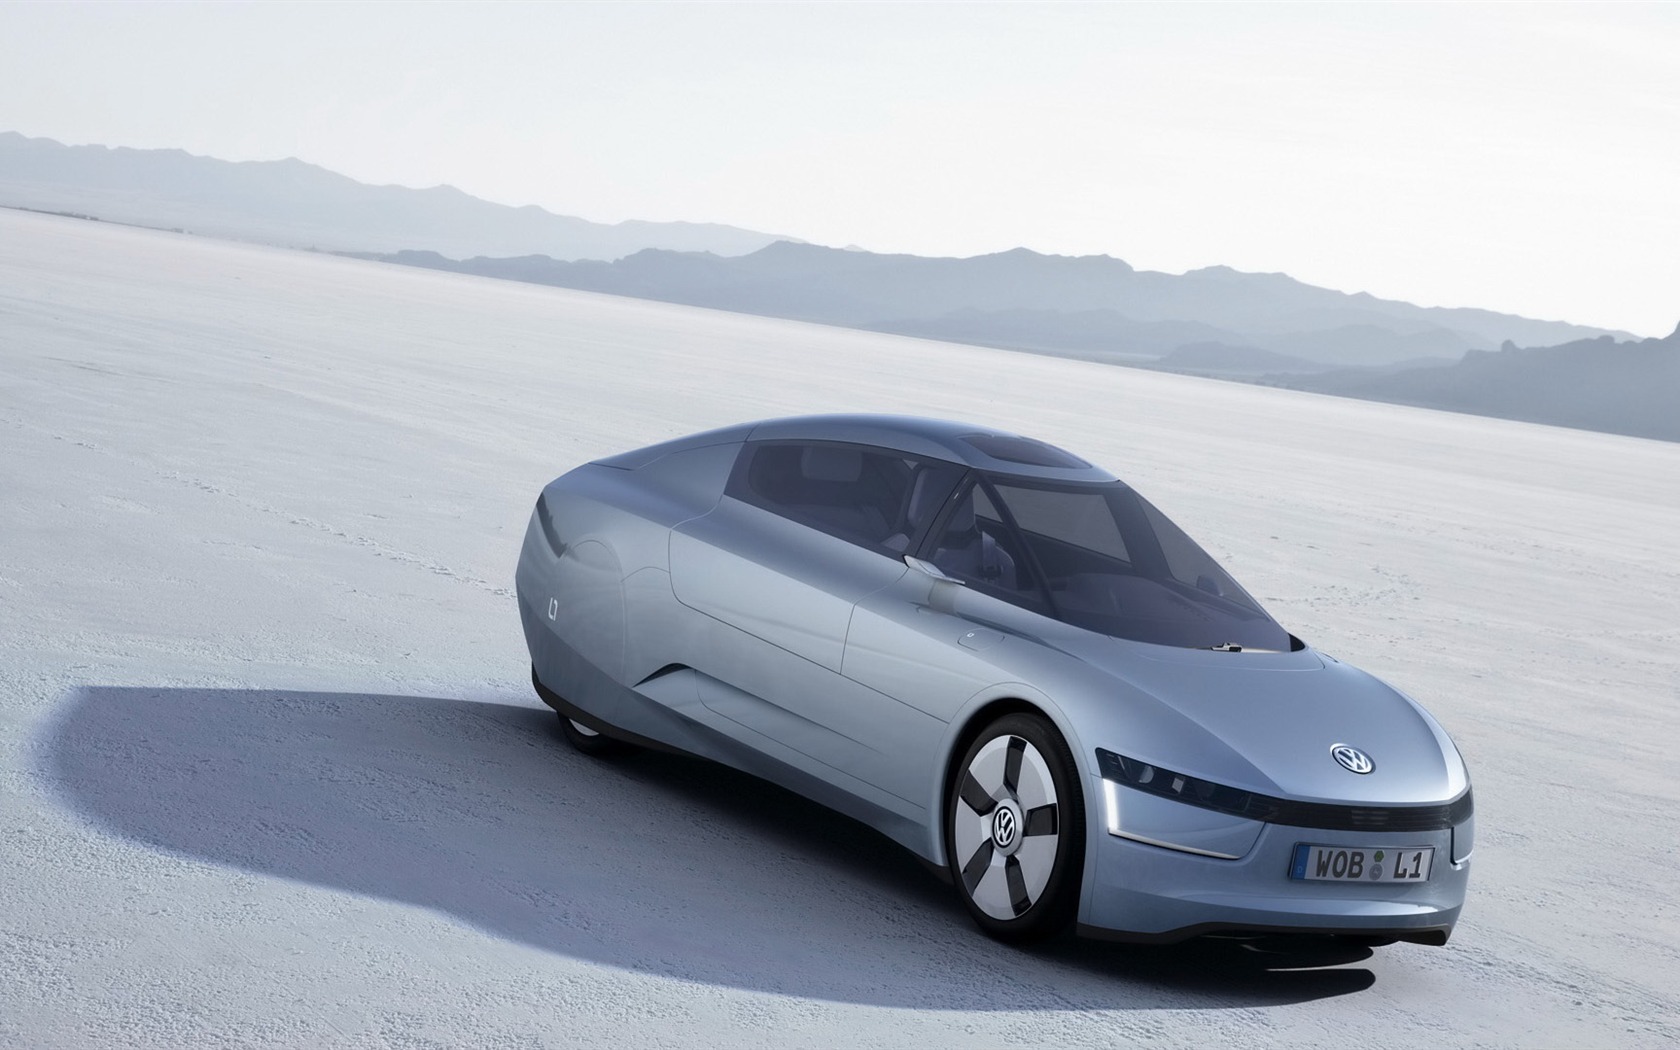 Volkswagen L1 Tapety Concept Car #7 - 1680x1050